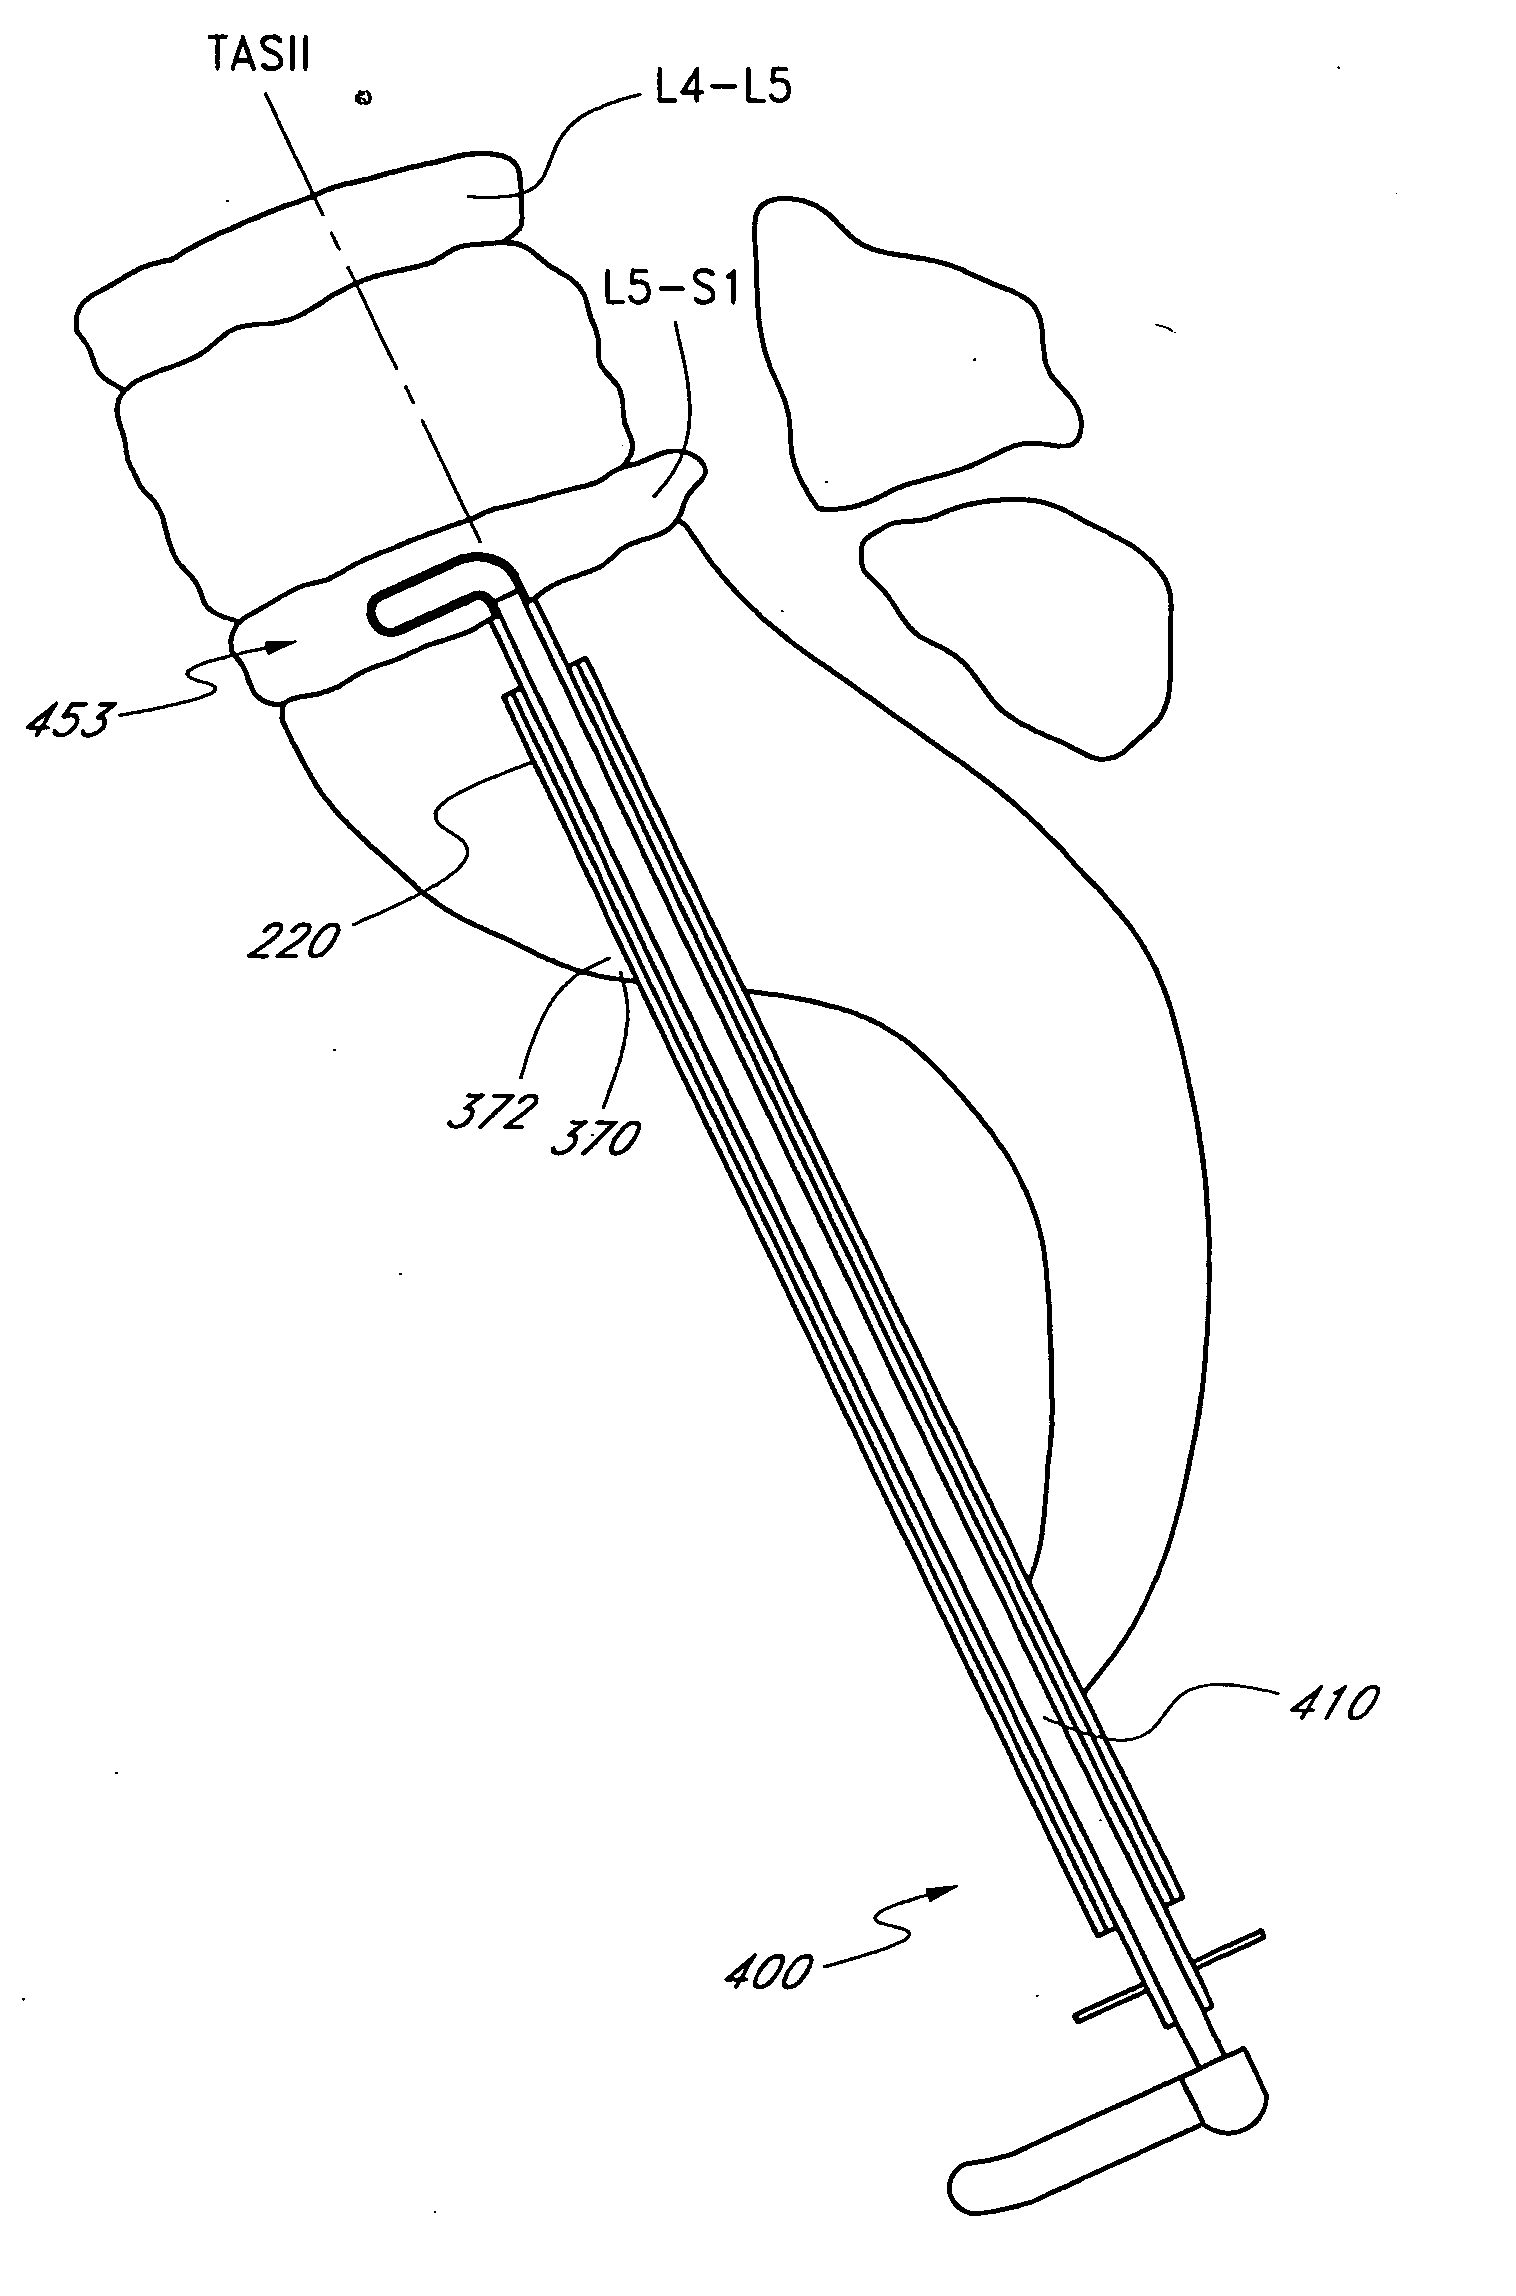 Method and apparatus for manipulating material in the spine